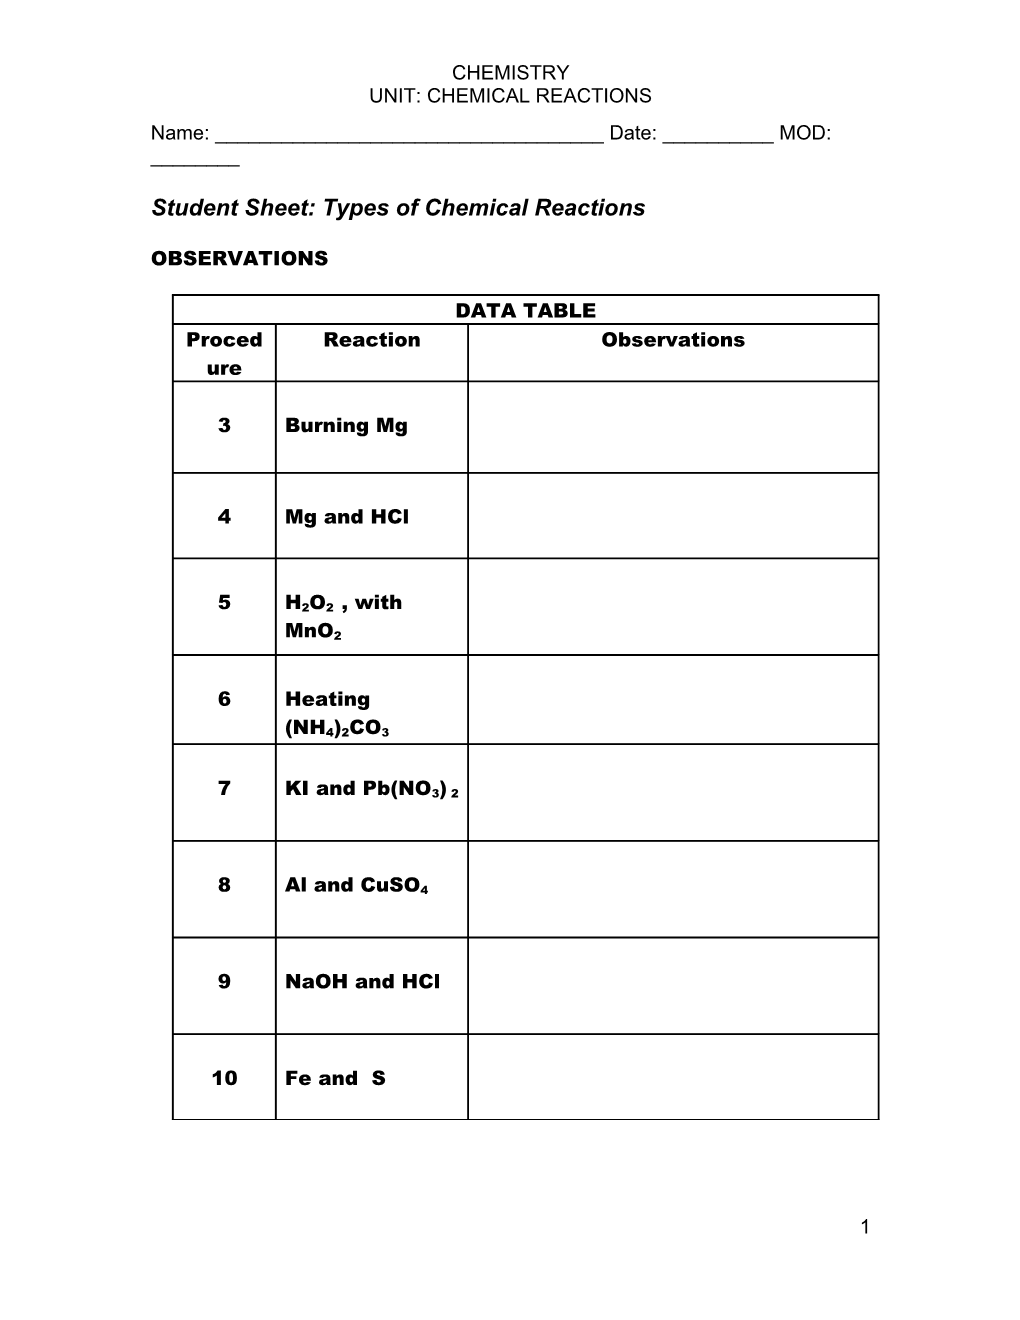 Student Sheet: Types of Chemical Reactions